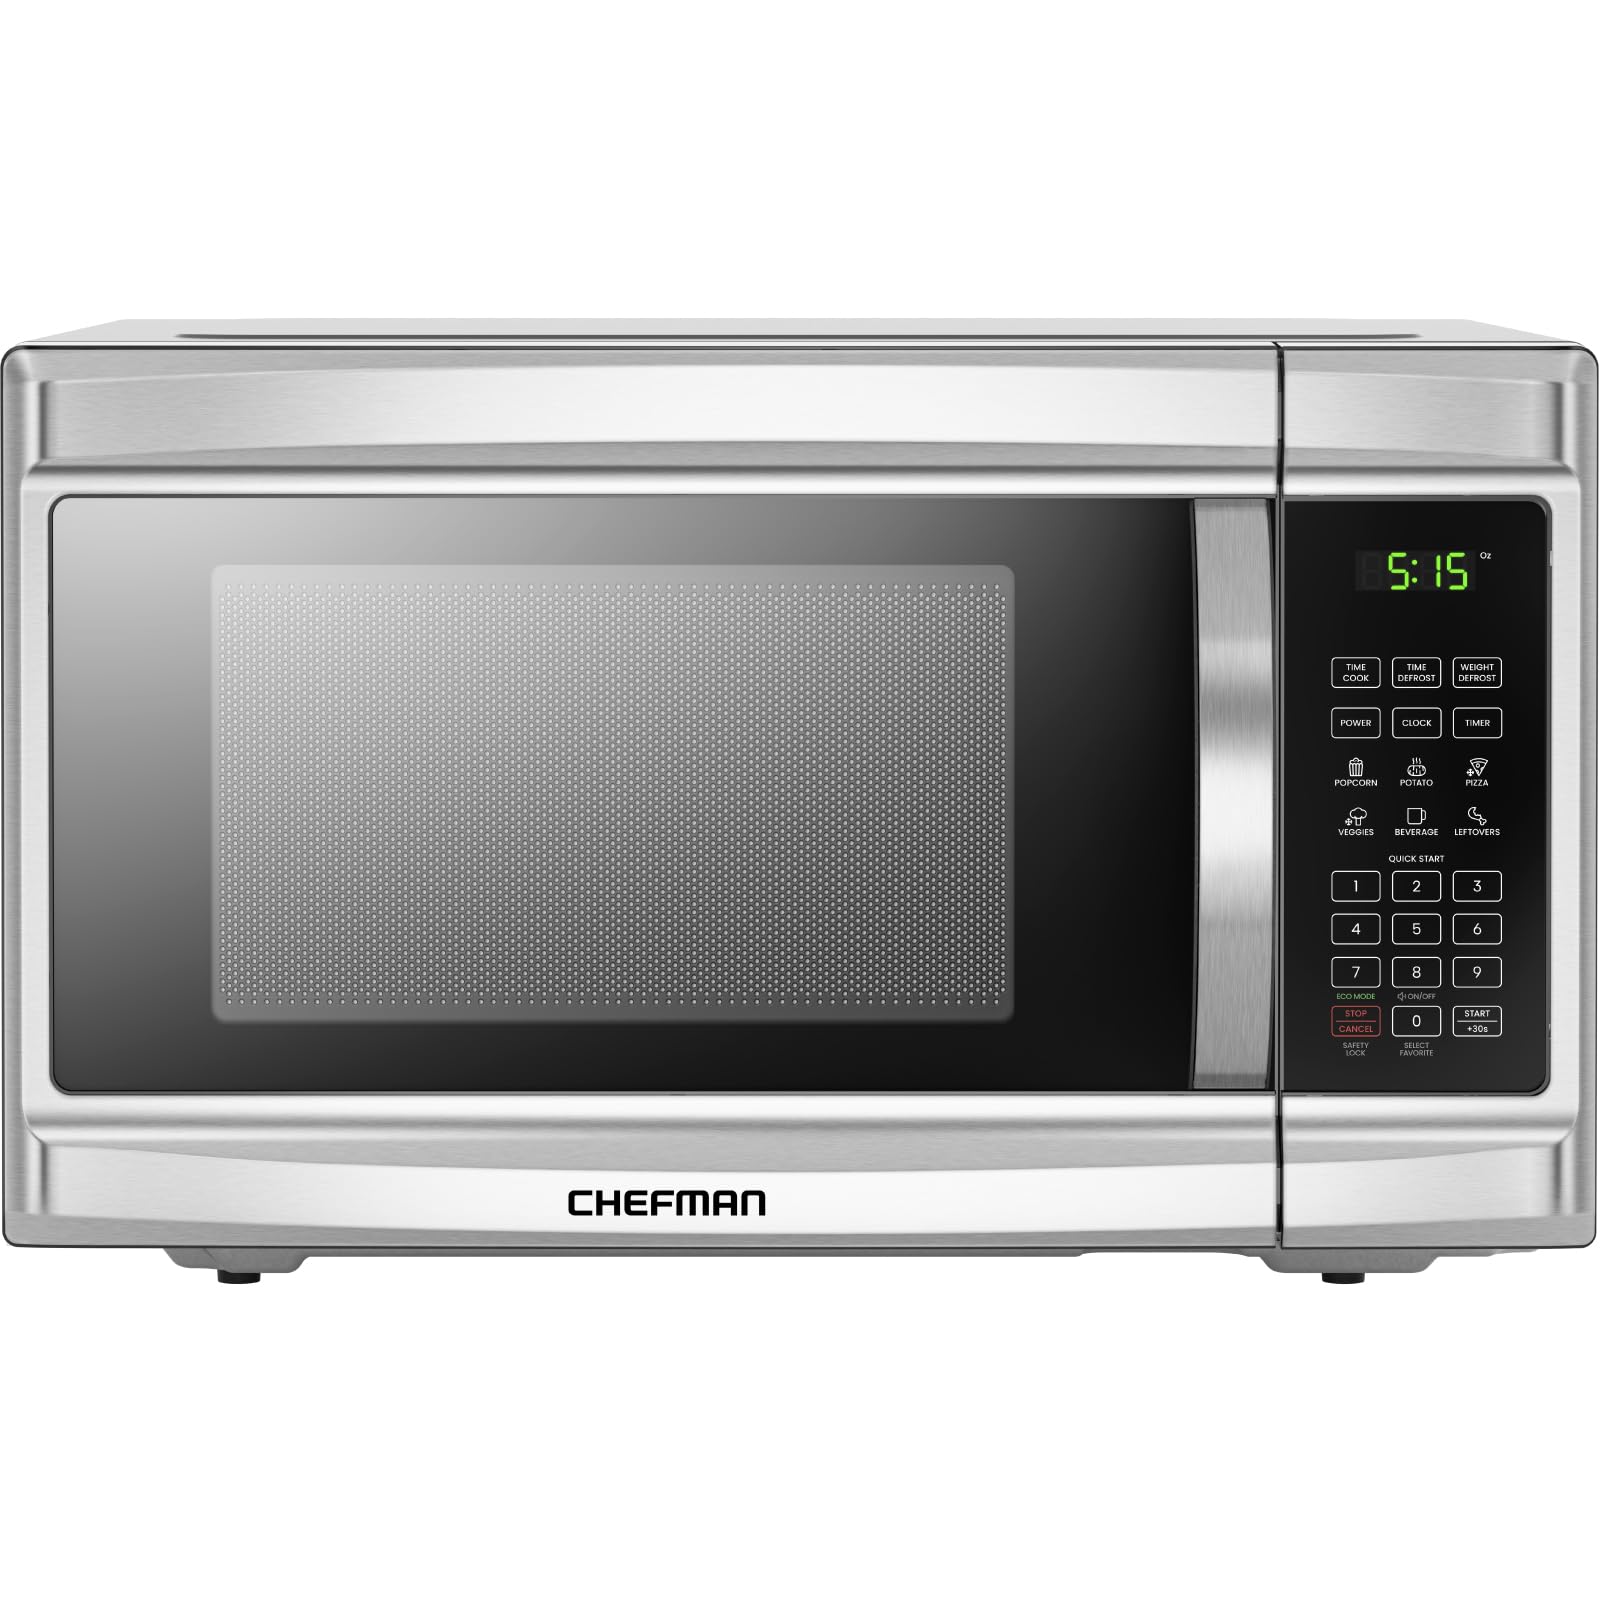 Chefman Countertop Microwave Oven, 1.3 Cu. Ft. Digital, Stainless Steel, 1000 Watts, with 6 Auto Menus, 10 Power Levels, Eco Mode, Memory, Mute Function, Child Safety Lock, Easy Clean Microwave Ovens